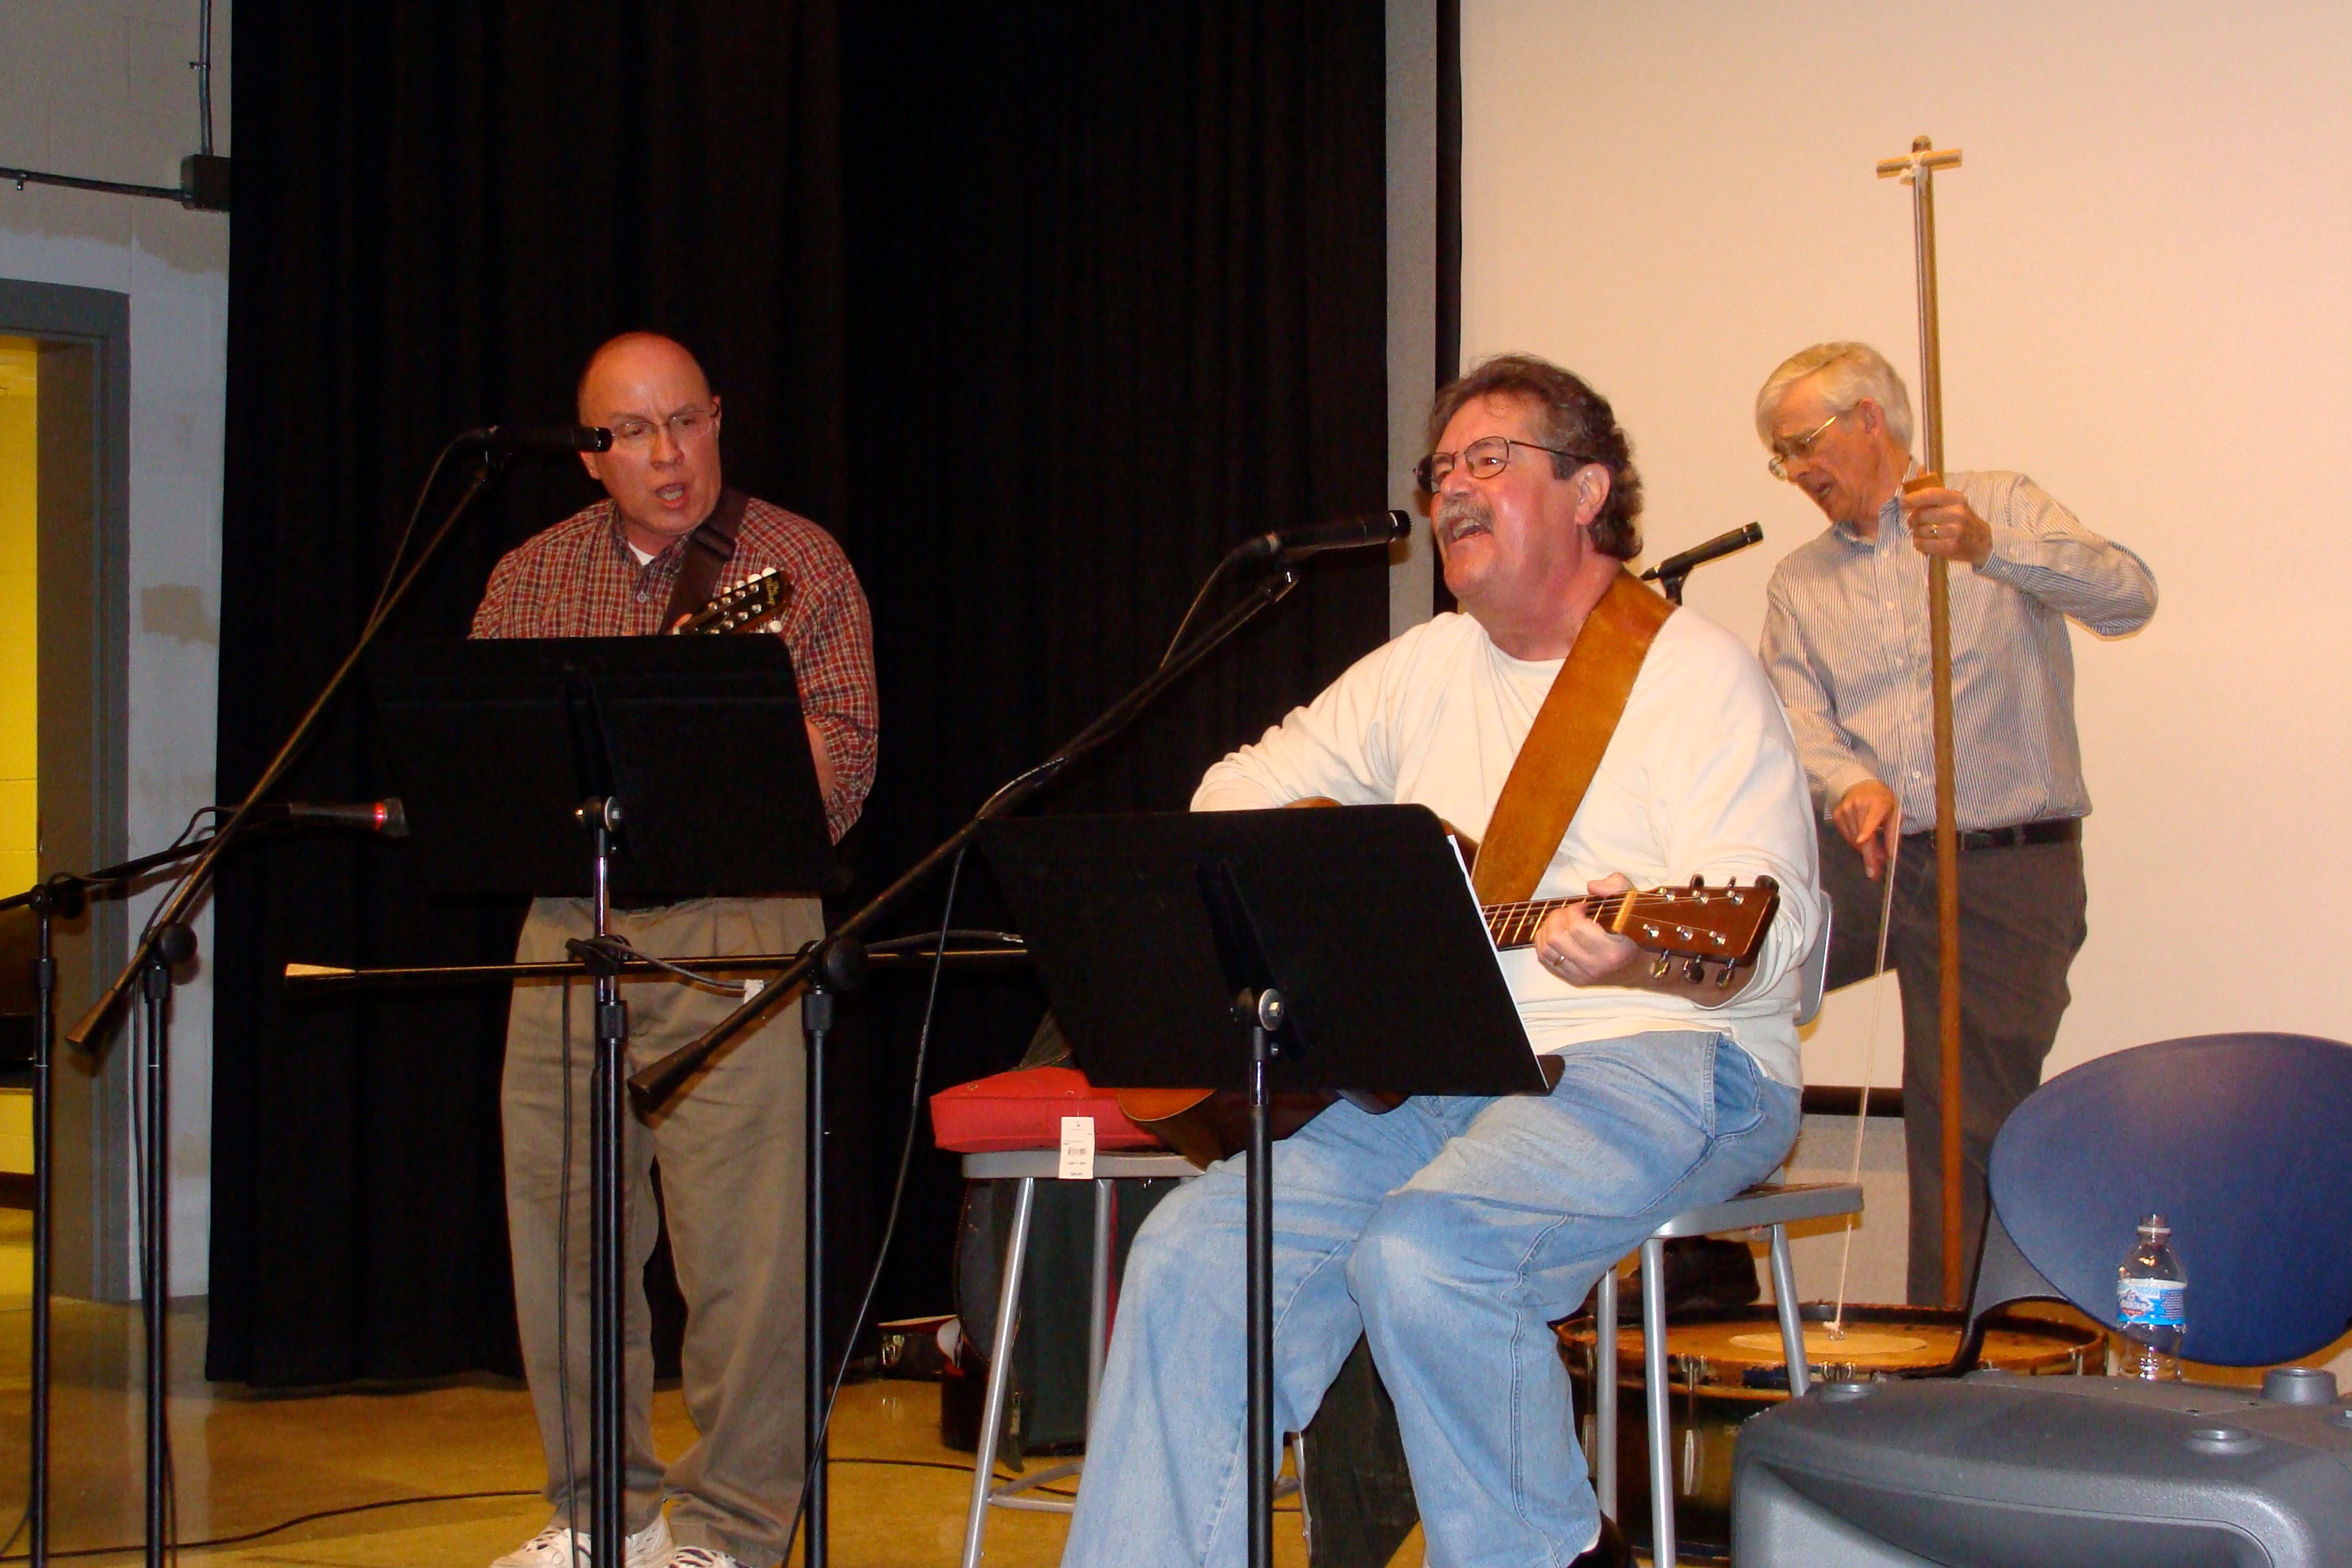 Mike Foster, seated, Rick Becker, left, and Brooks McDaniel perform at ICC North in Peoria in 2009.